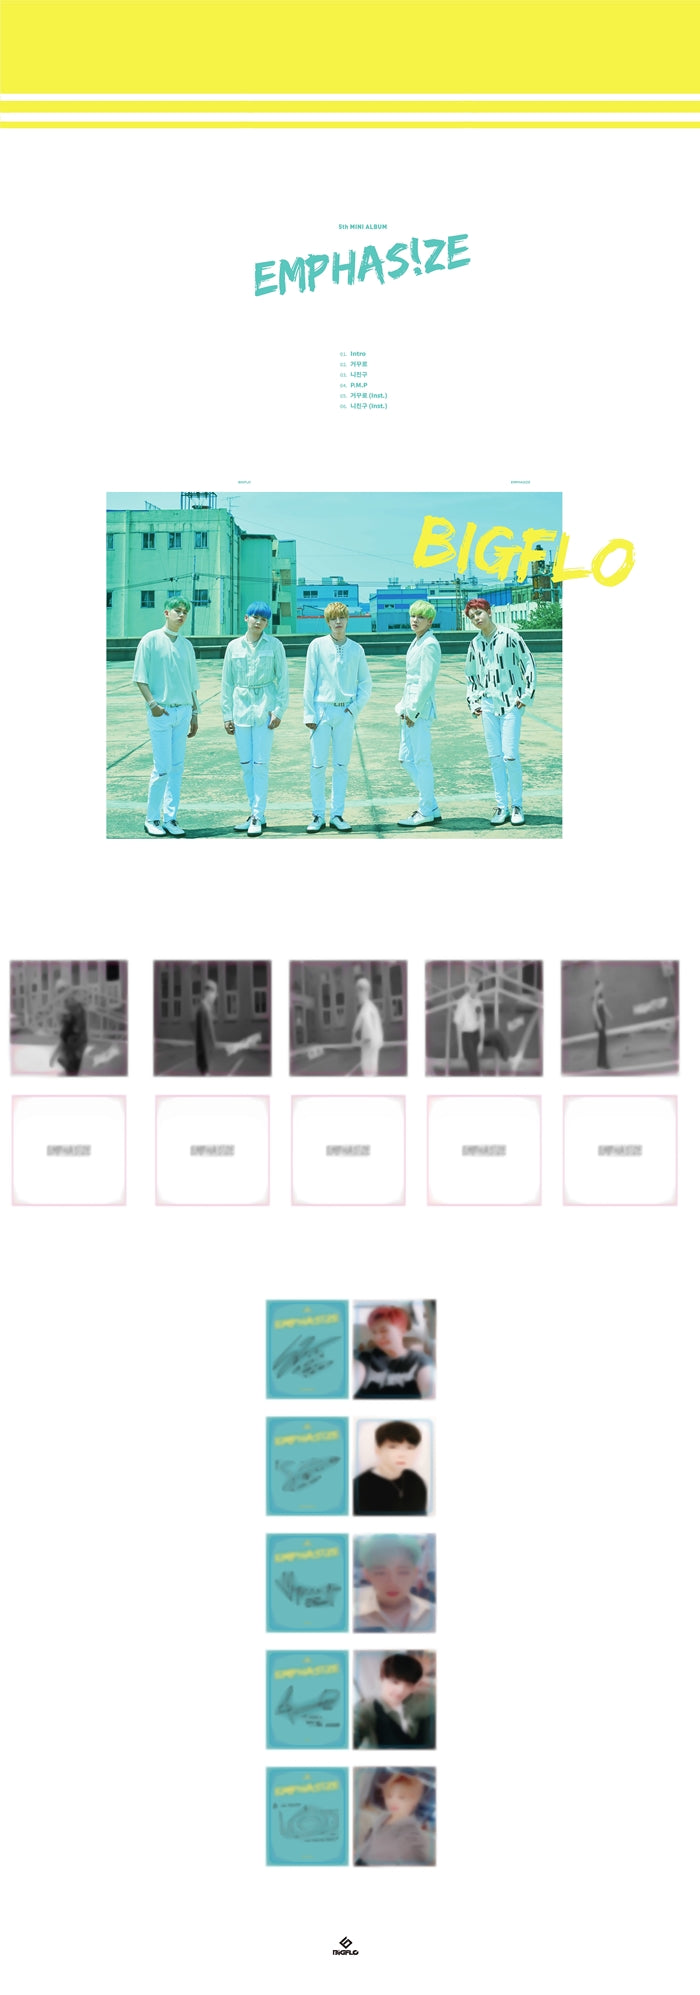 1 CD
1 Booklet (52 pages)
1 Photo Card
1 Postcard